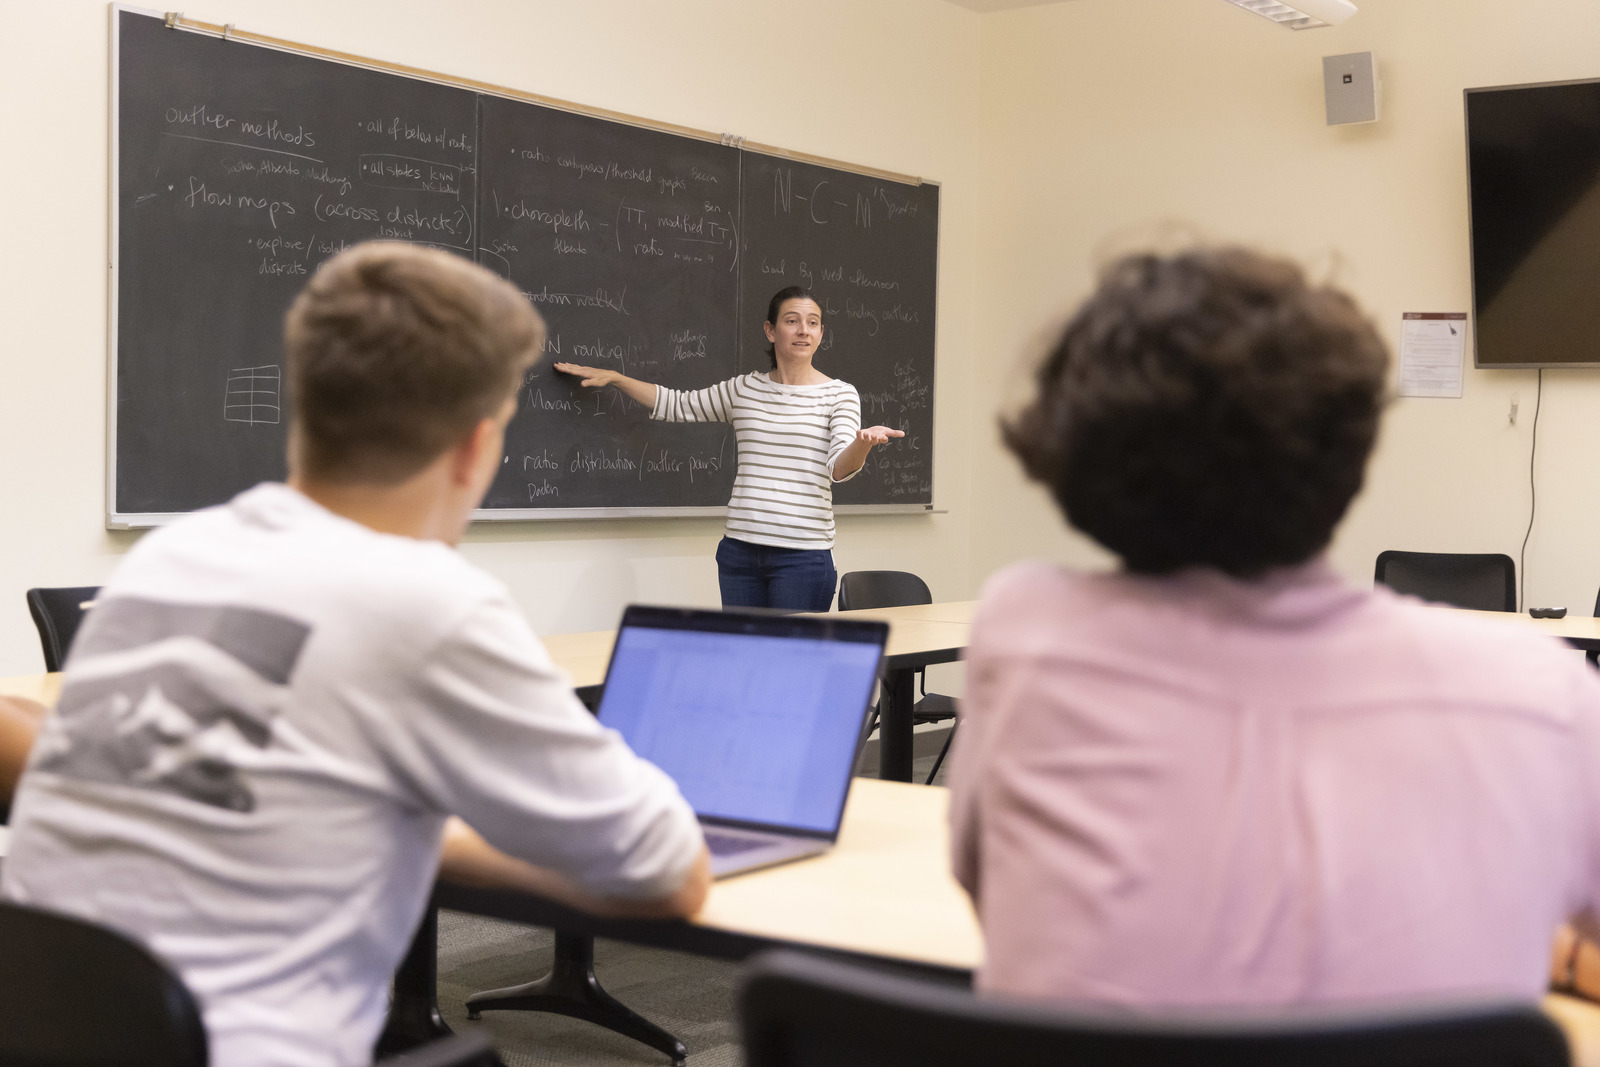 Prof. Courtney Thatcher stands at the chalkboard during a class